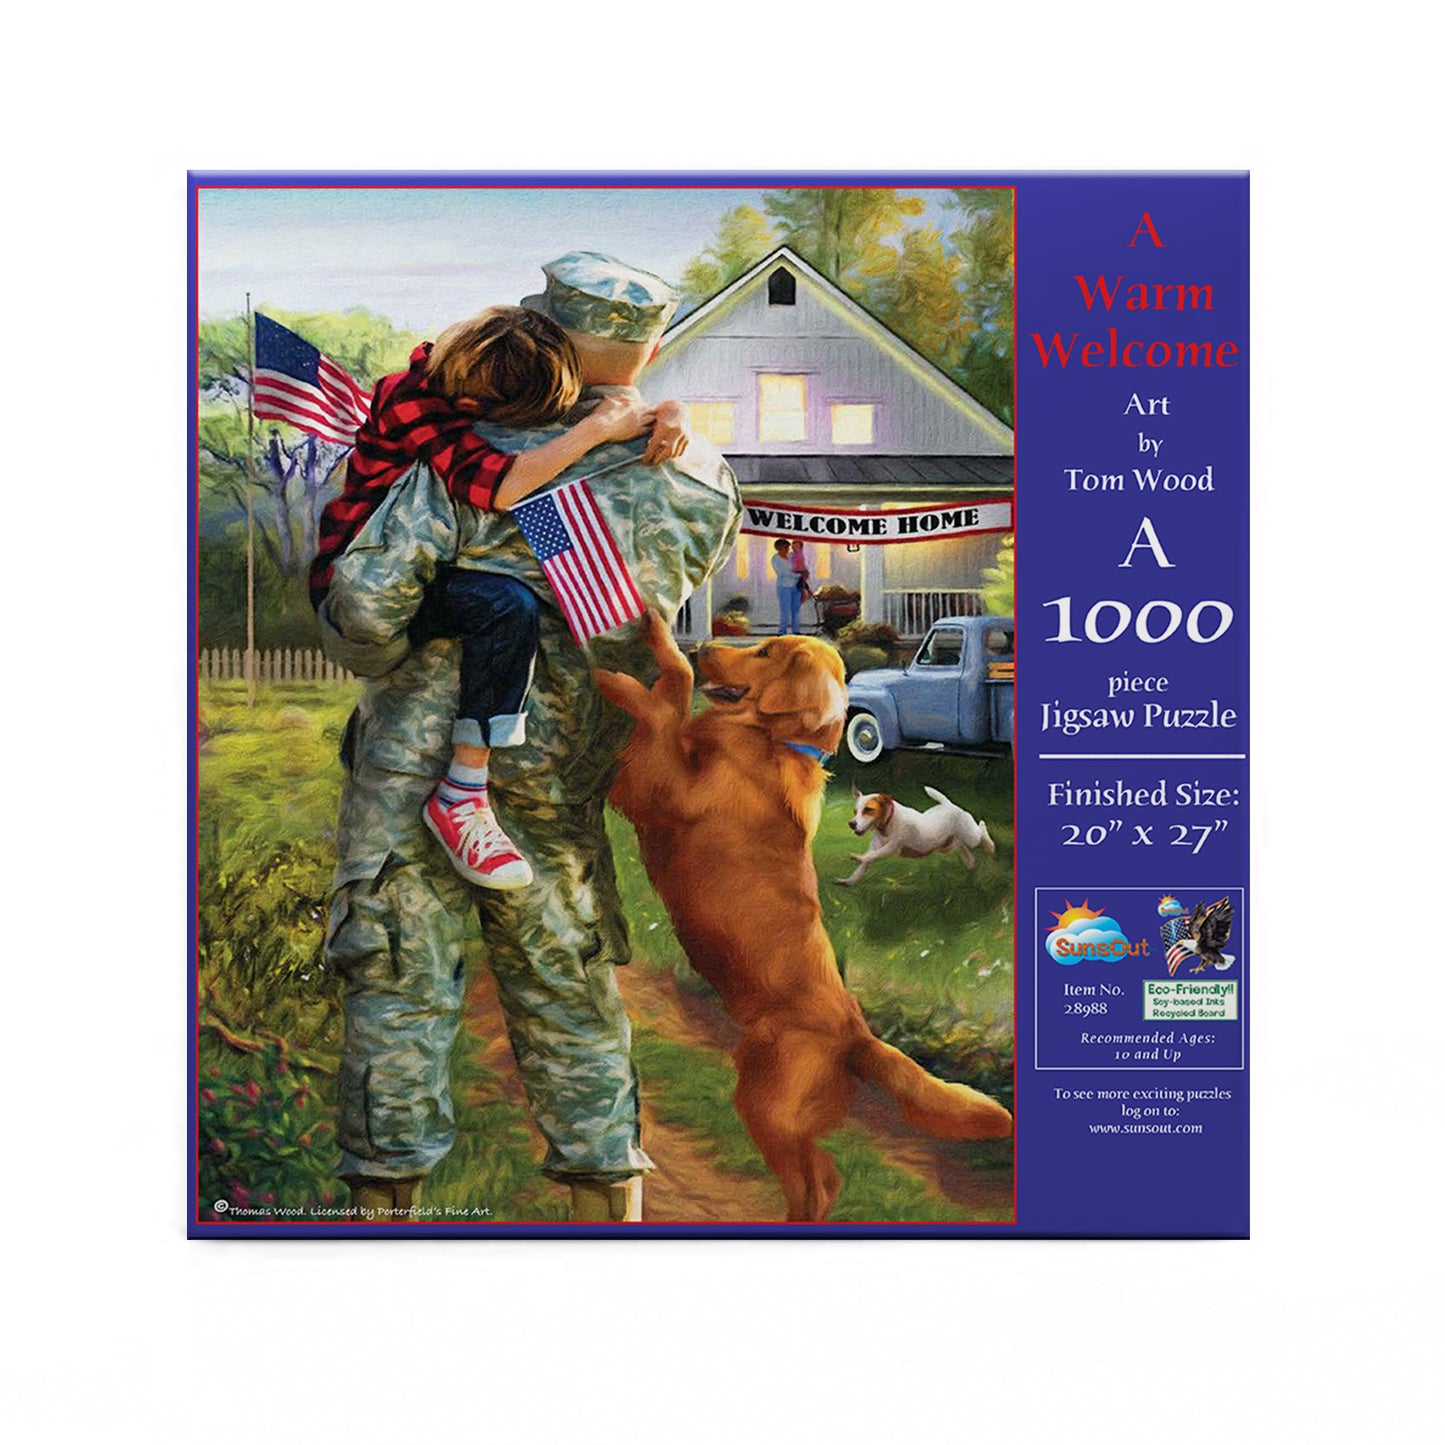 A Warm Welcome Home - 1000 Piece Jigsaw Puzzle